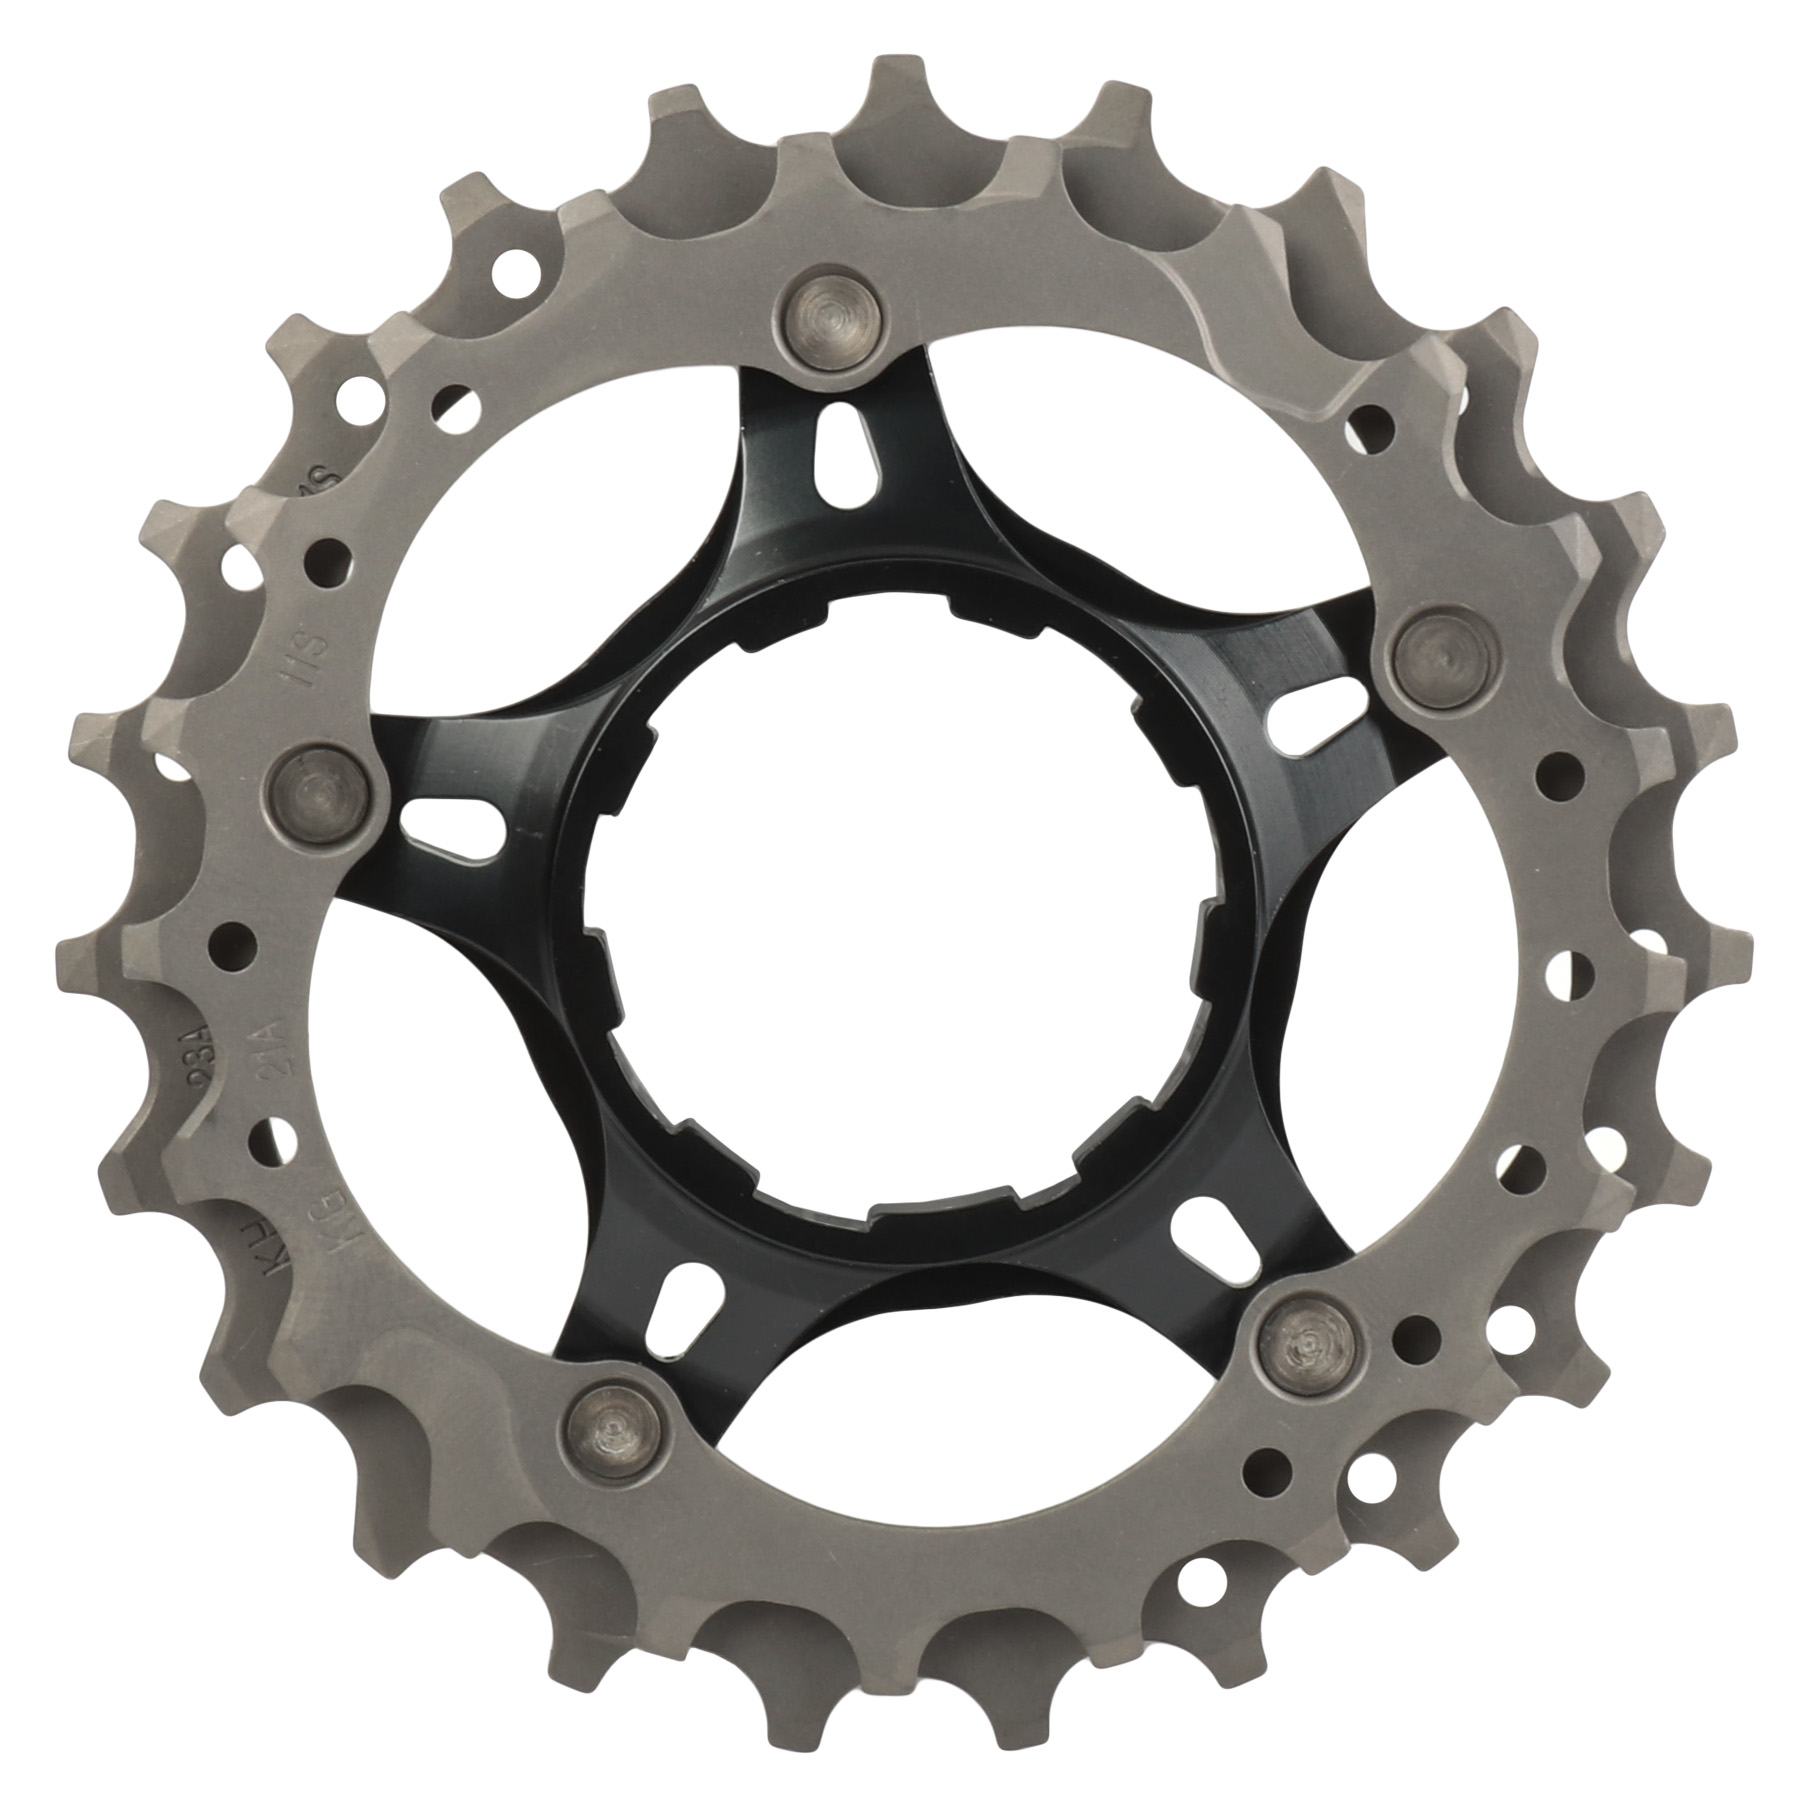 Picture of Shimano Sprocket for Dura Ace 11-Speed Cassette - 21-23 T for 11-23 (Y1YC98070) - CS-9000